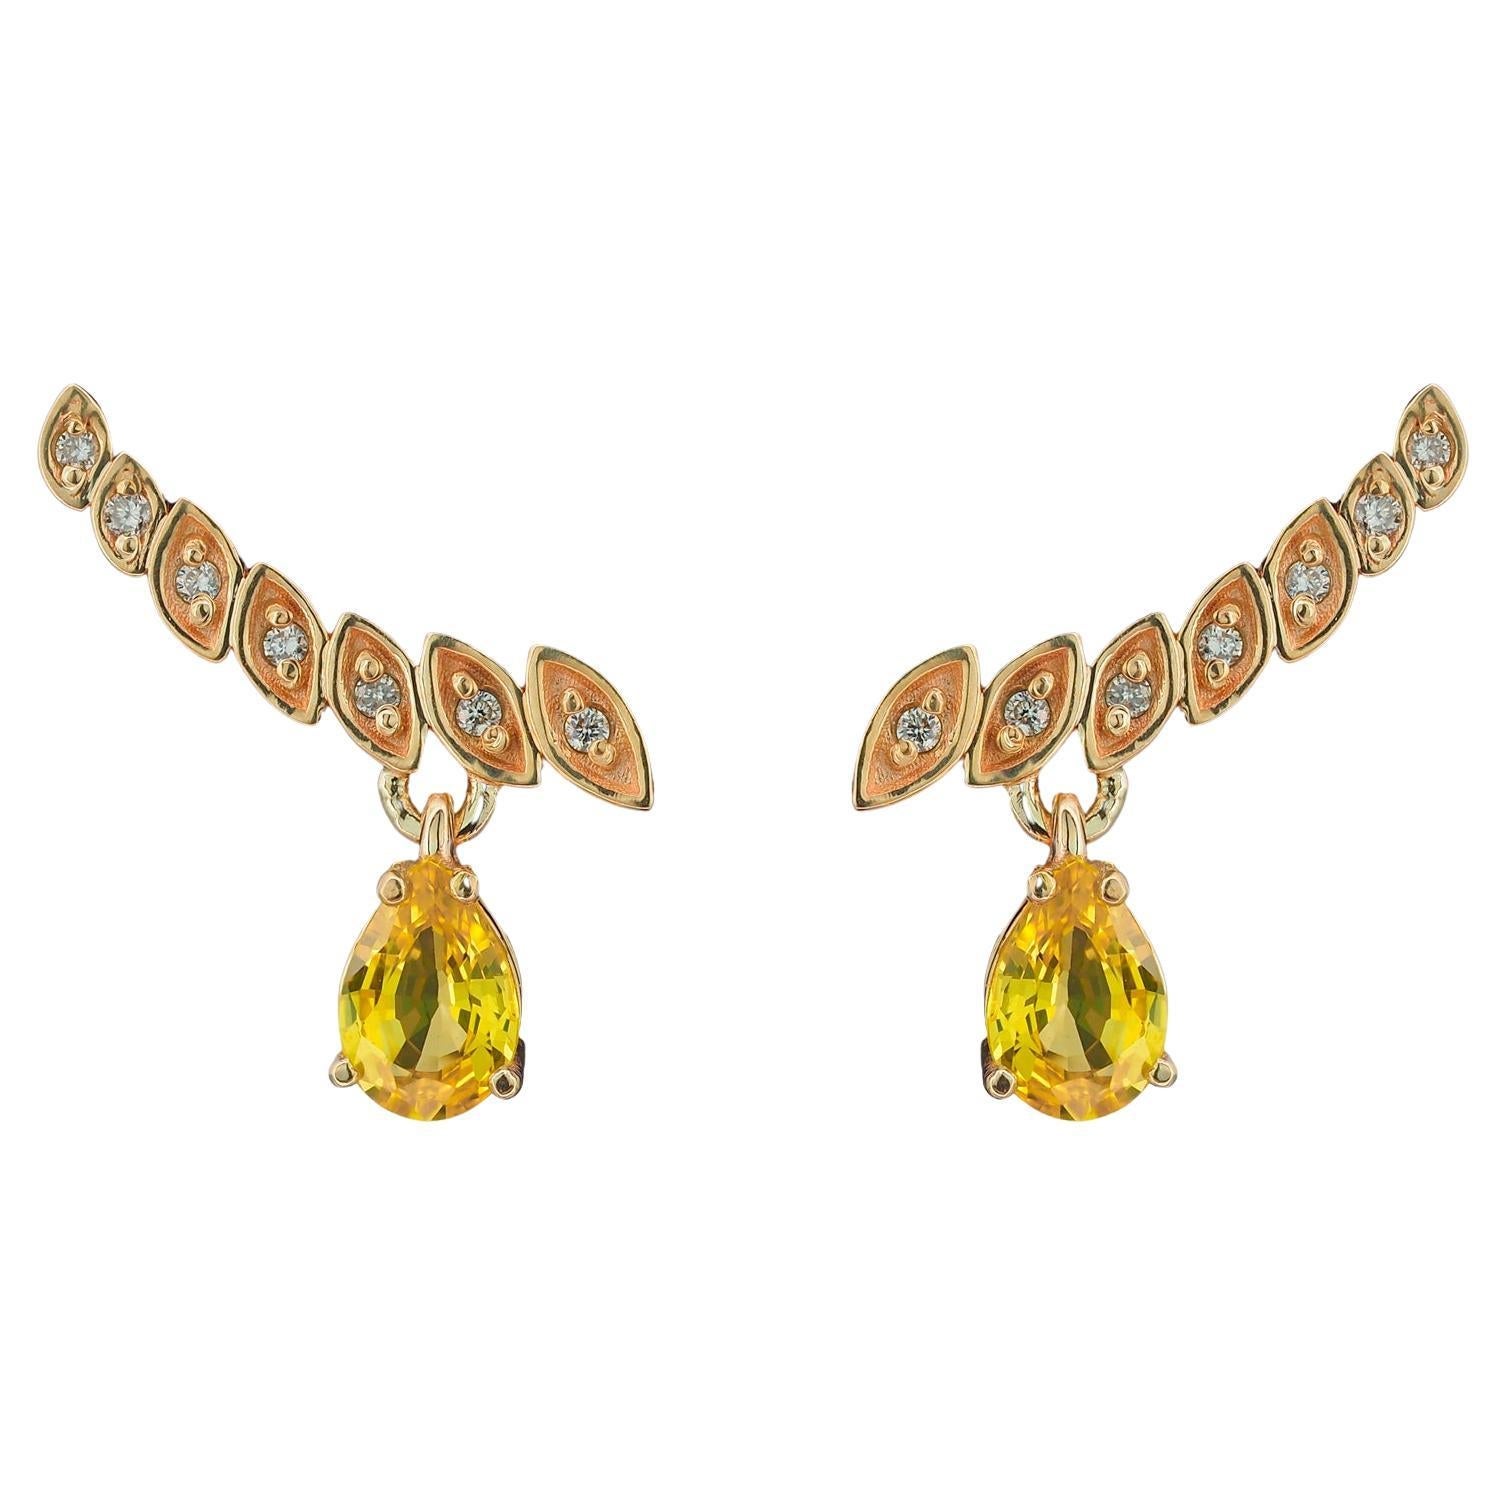 14k Gold Earrings with Pear Sapphires and Diamonds